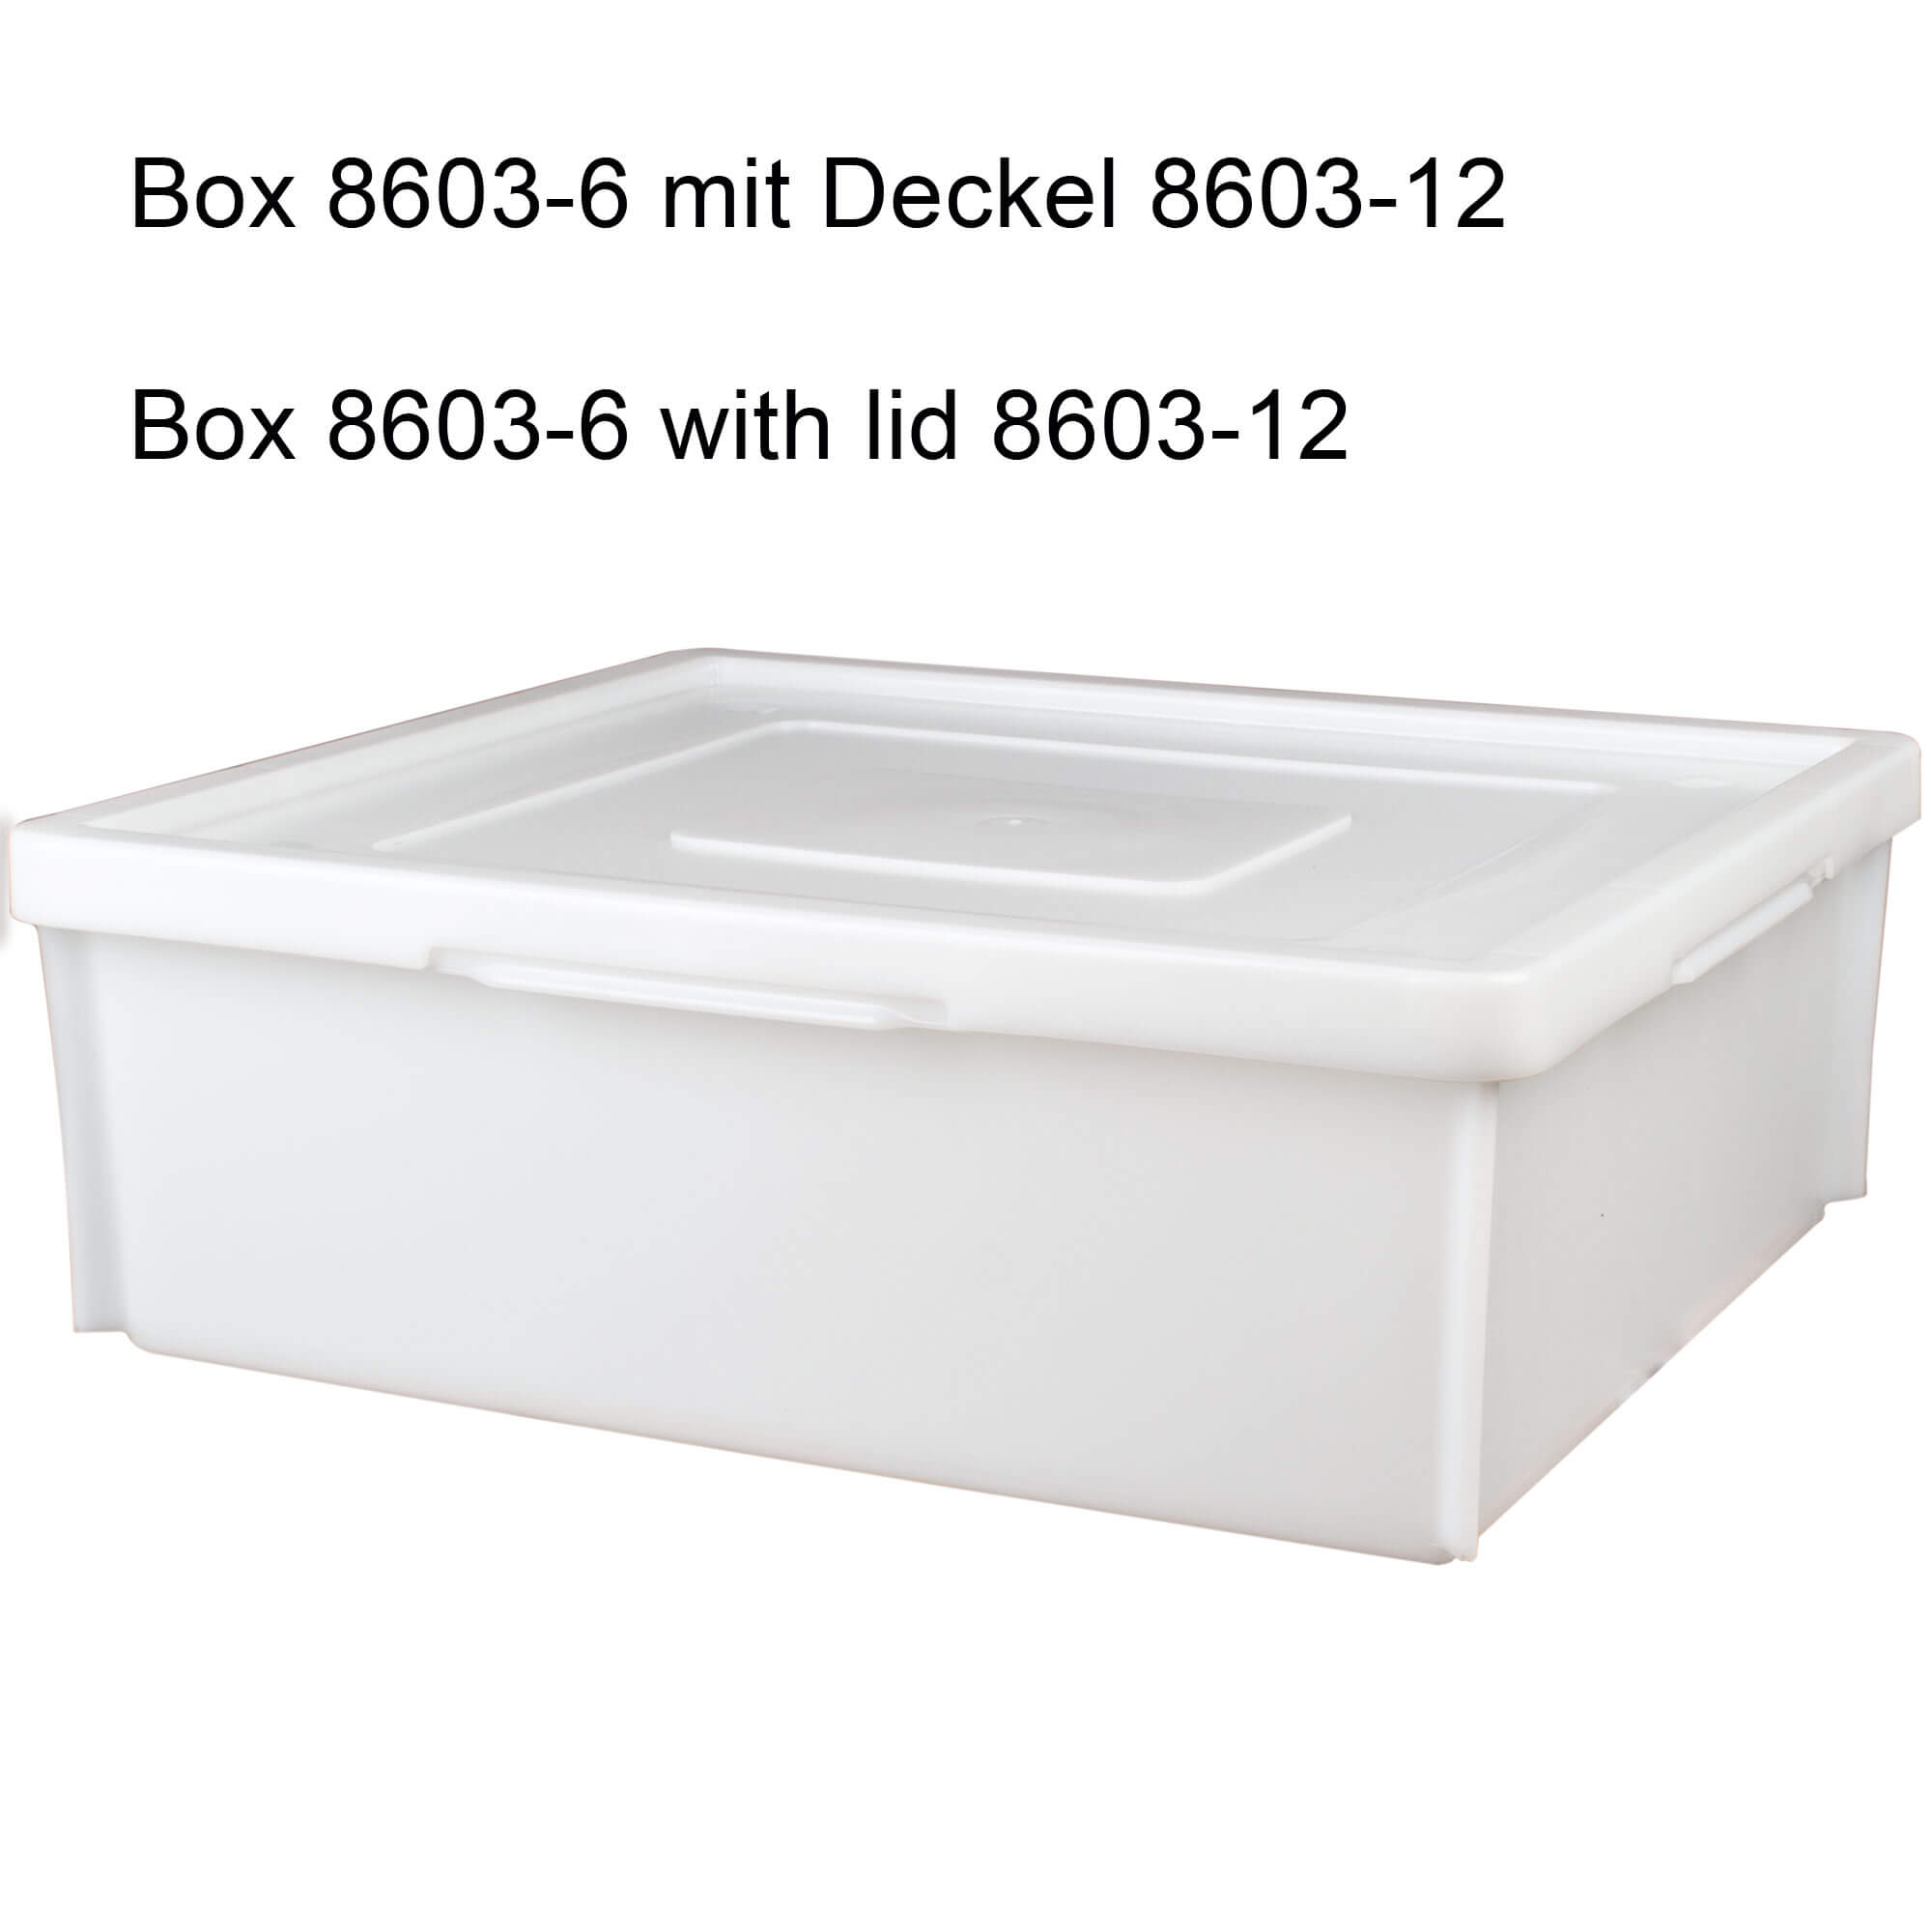 Stacking and transport container Classic white - 515x445x165mm (30l)